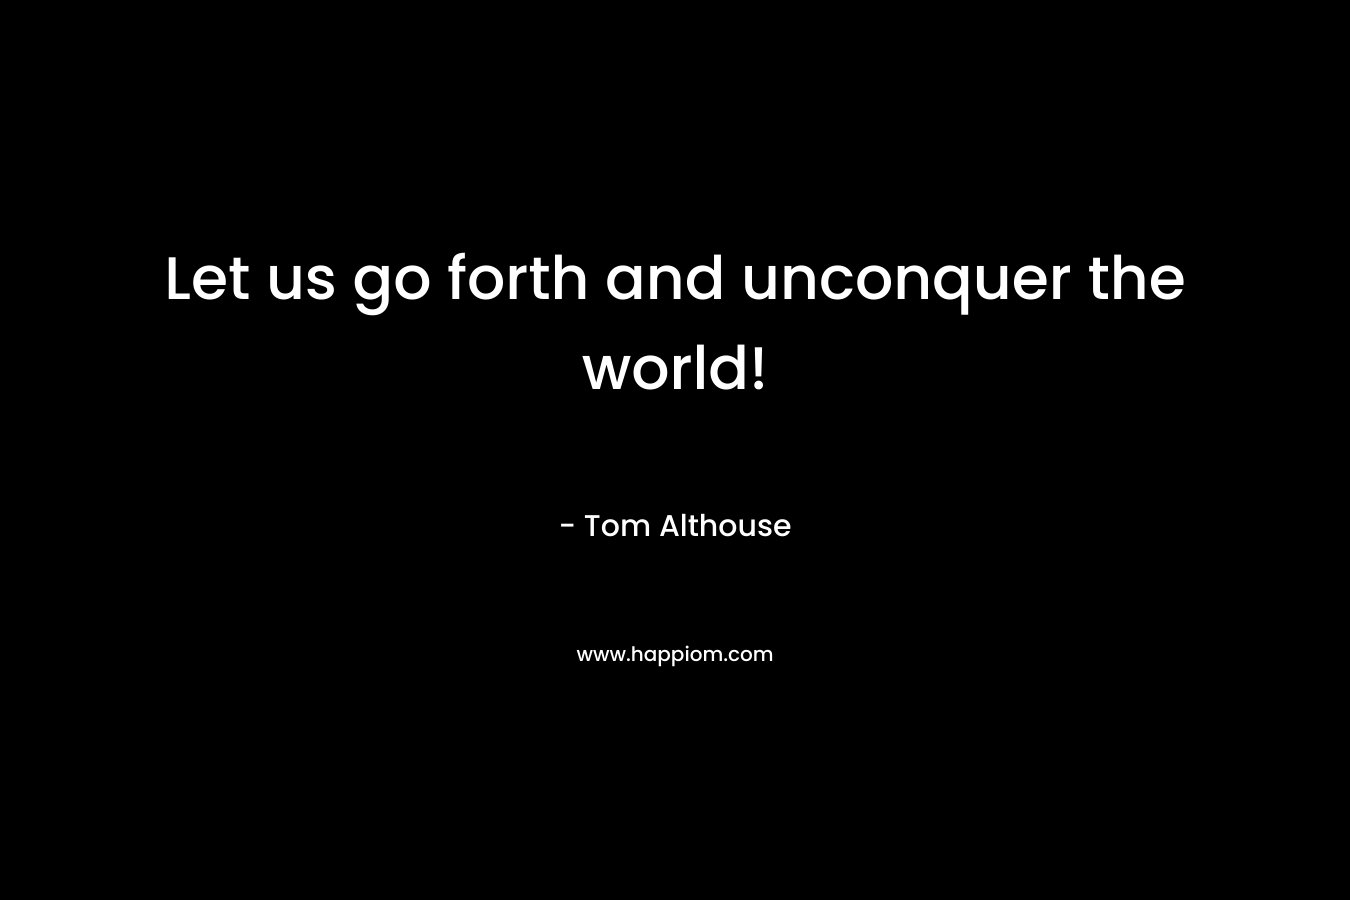 Let us go forth and unconquer the world!